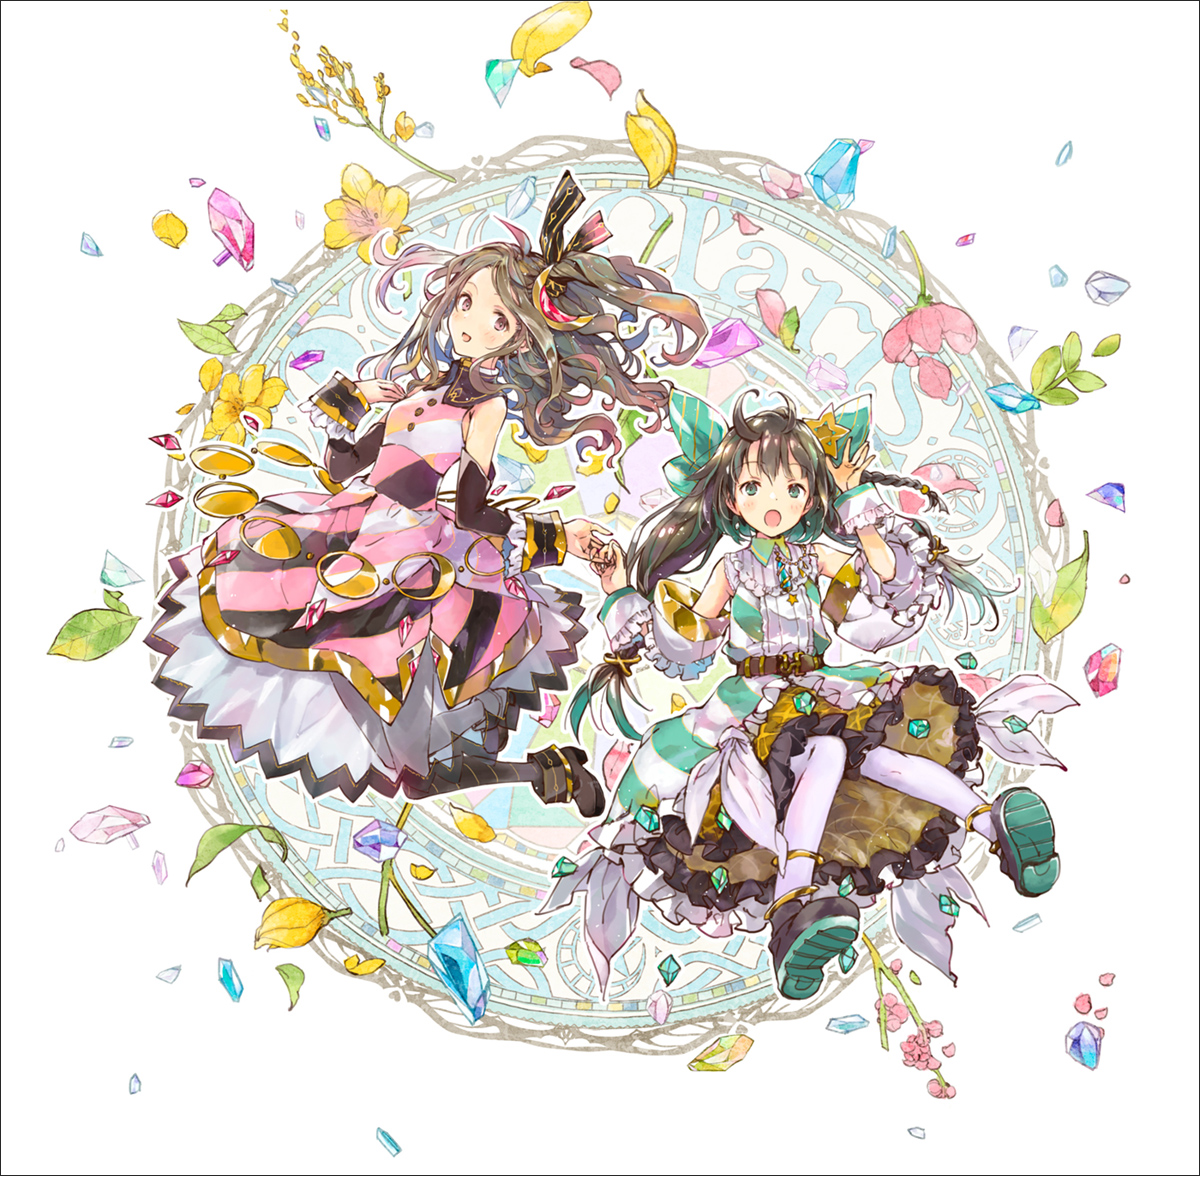 Cover for『ClariS - Hitomi no Naka no Lorelei』from the release『Parfaitone』